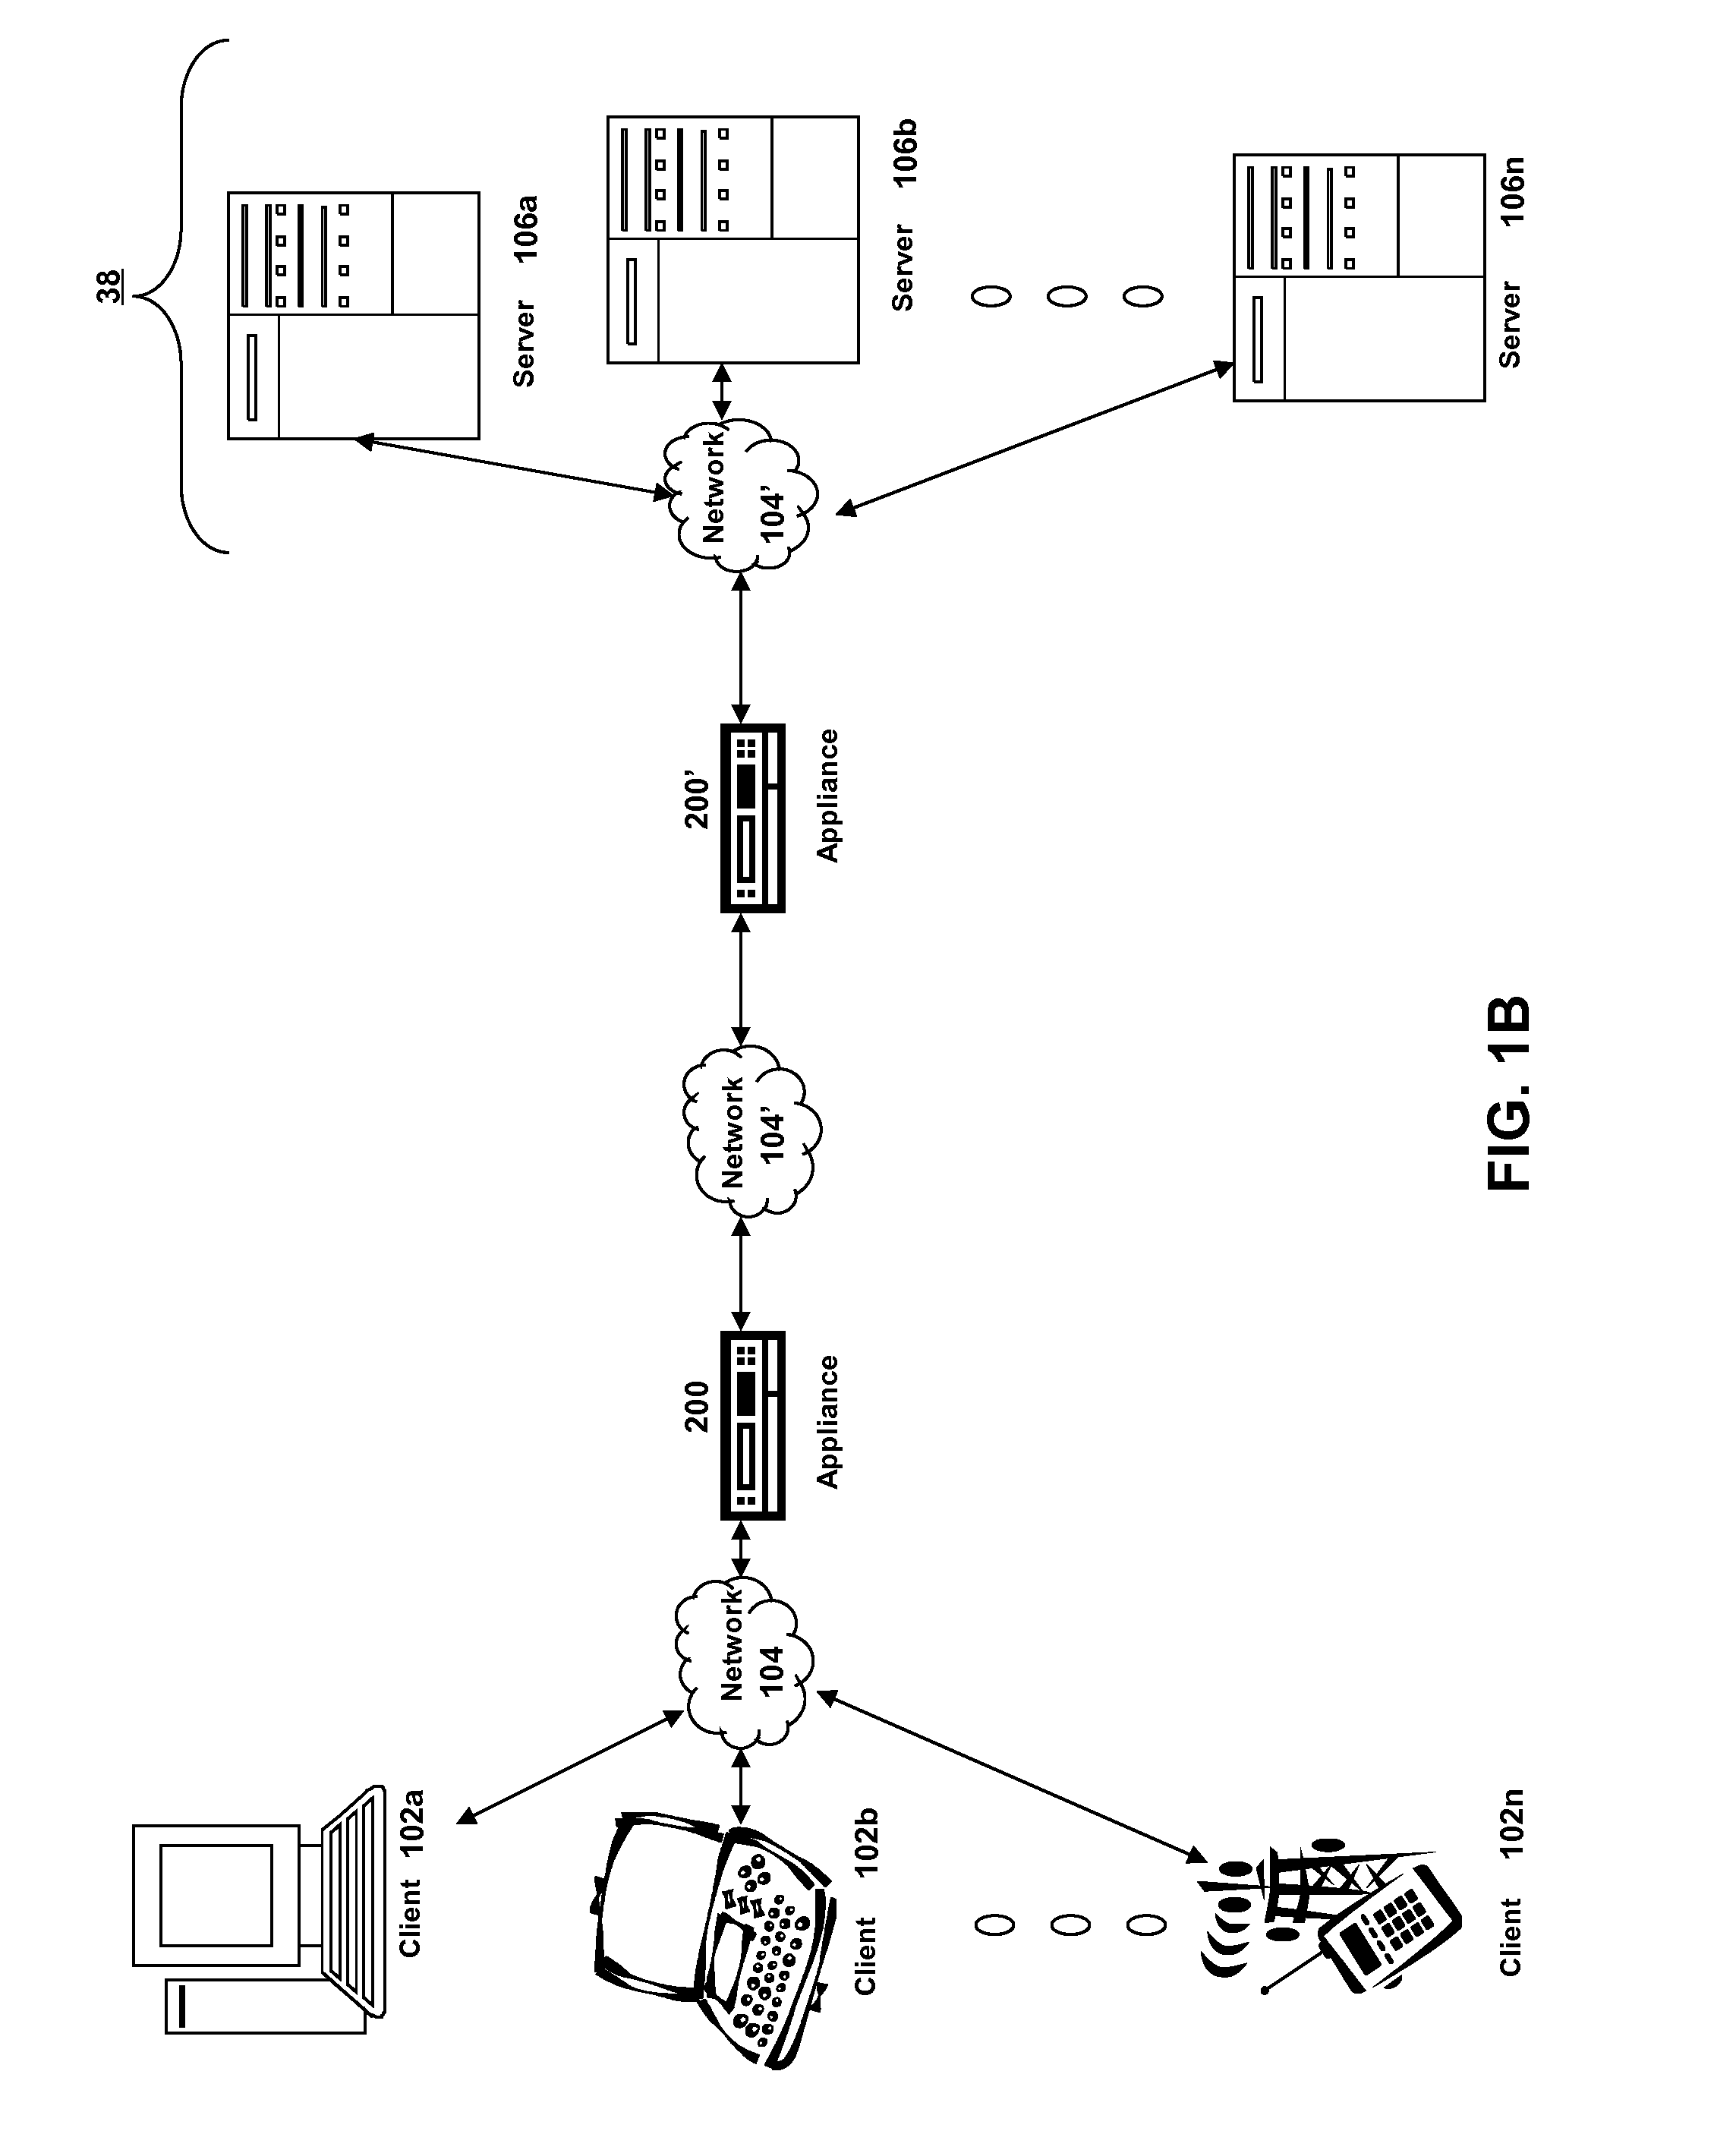 Systems and methods for just-in-time state sharing